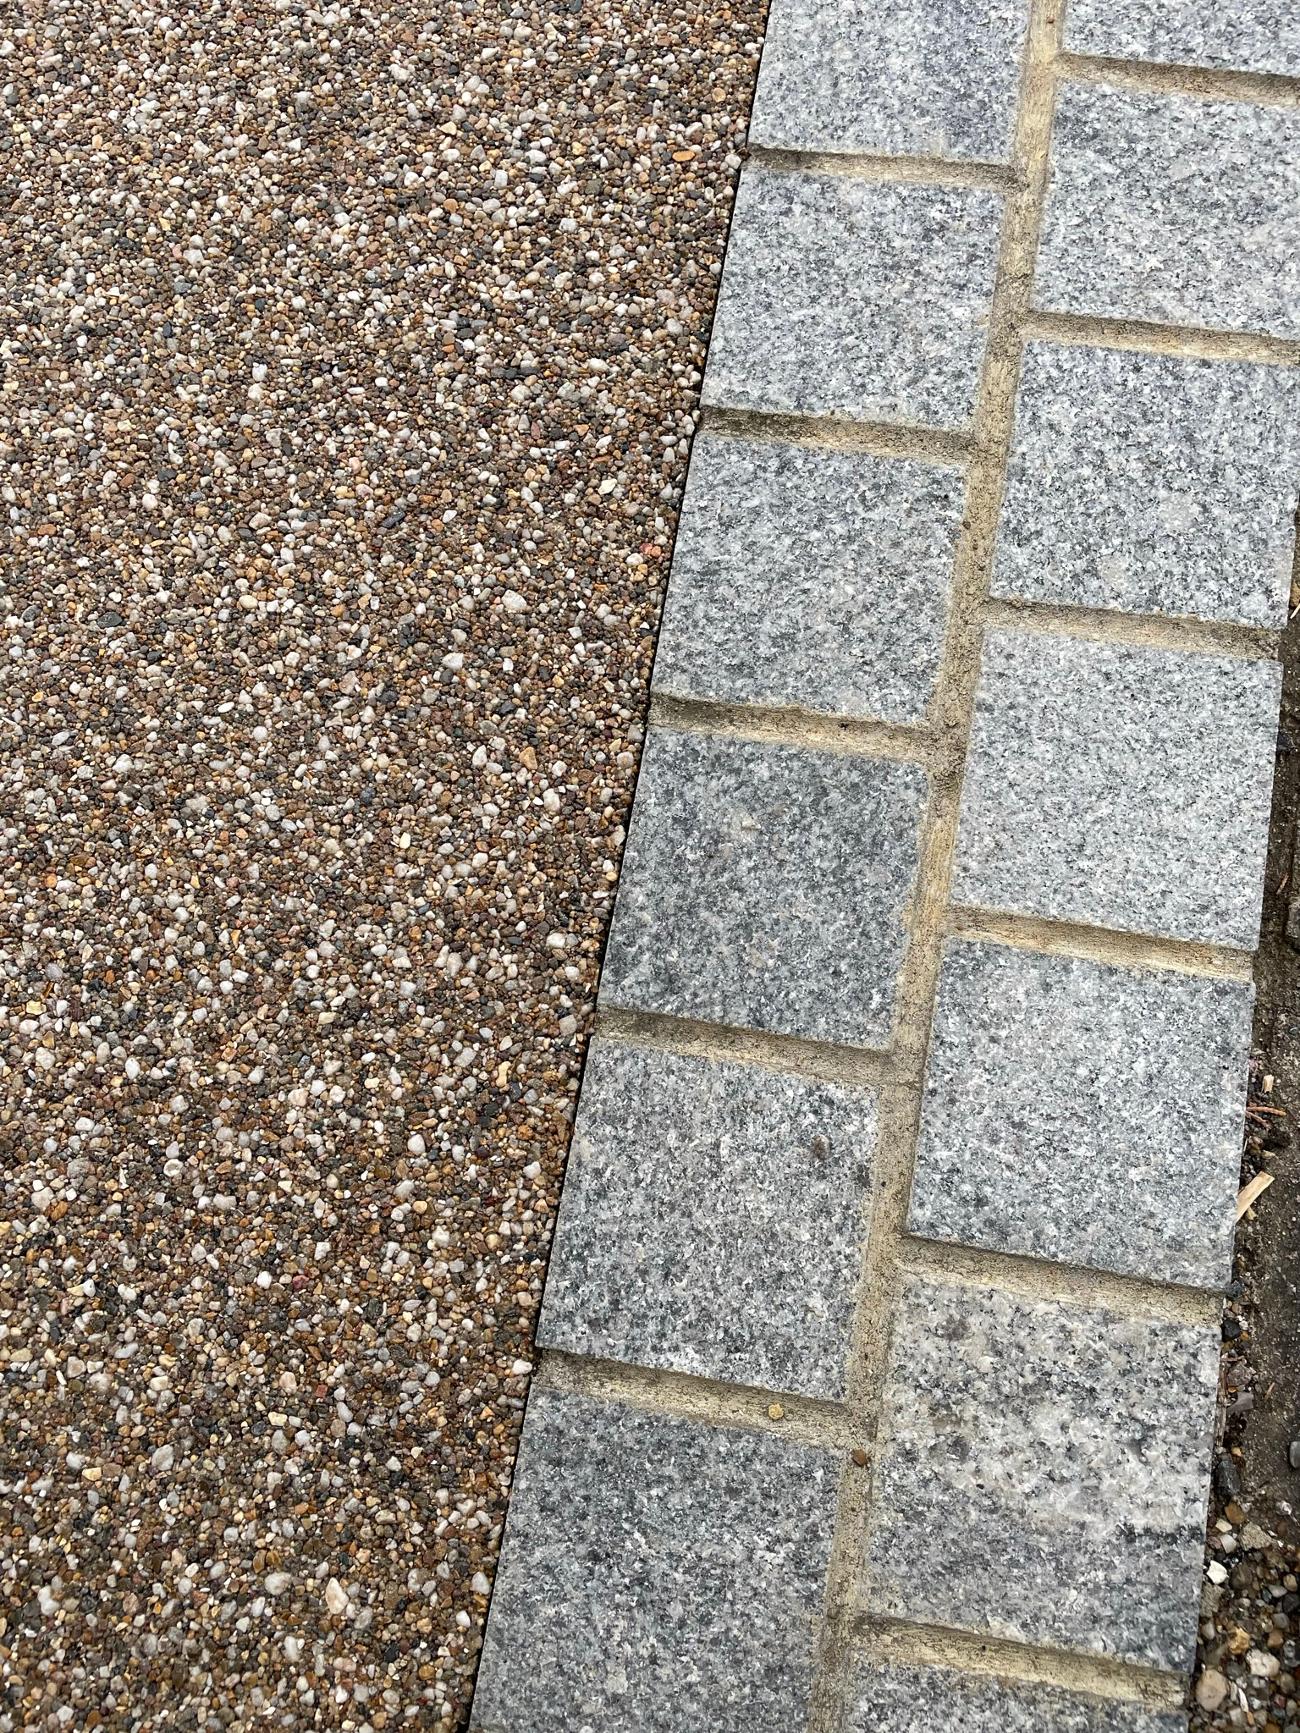 Additional Services | DGR Surfaces | Resin Driveways in Kent gallery image 9